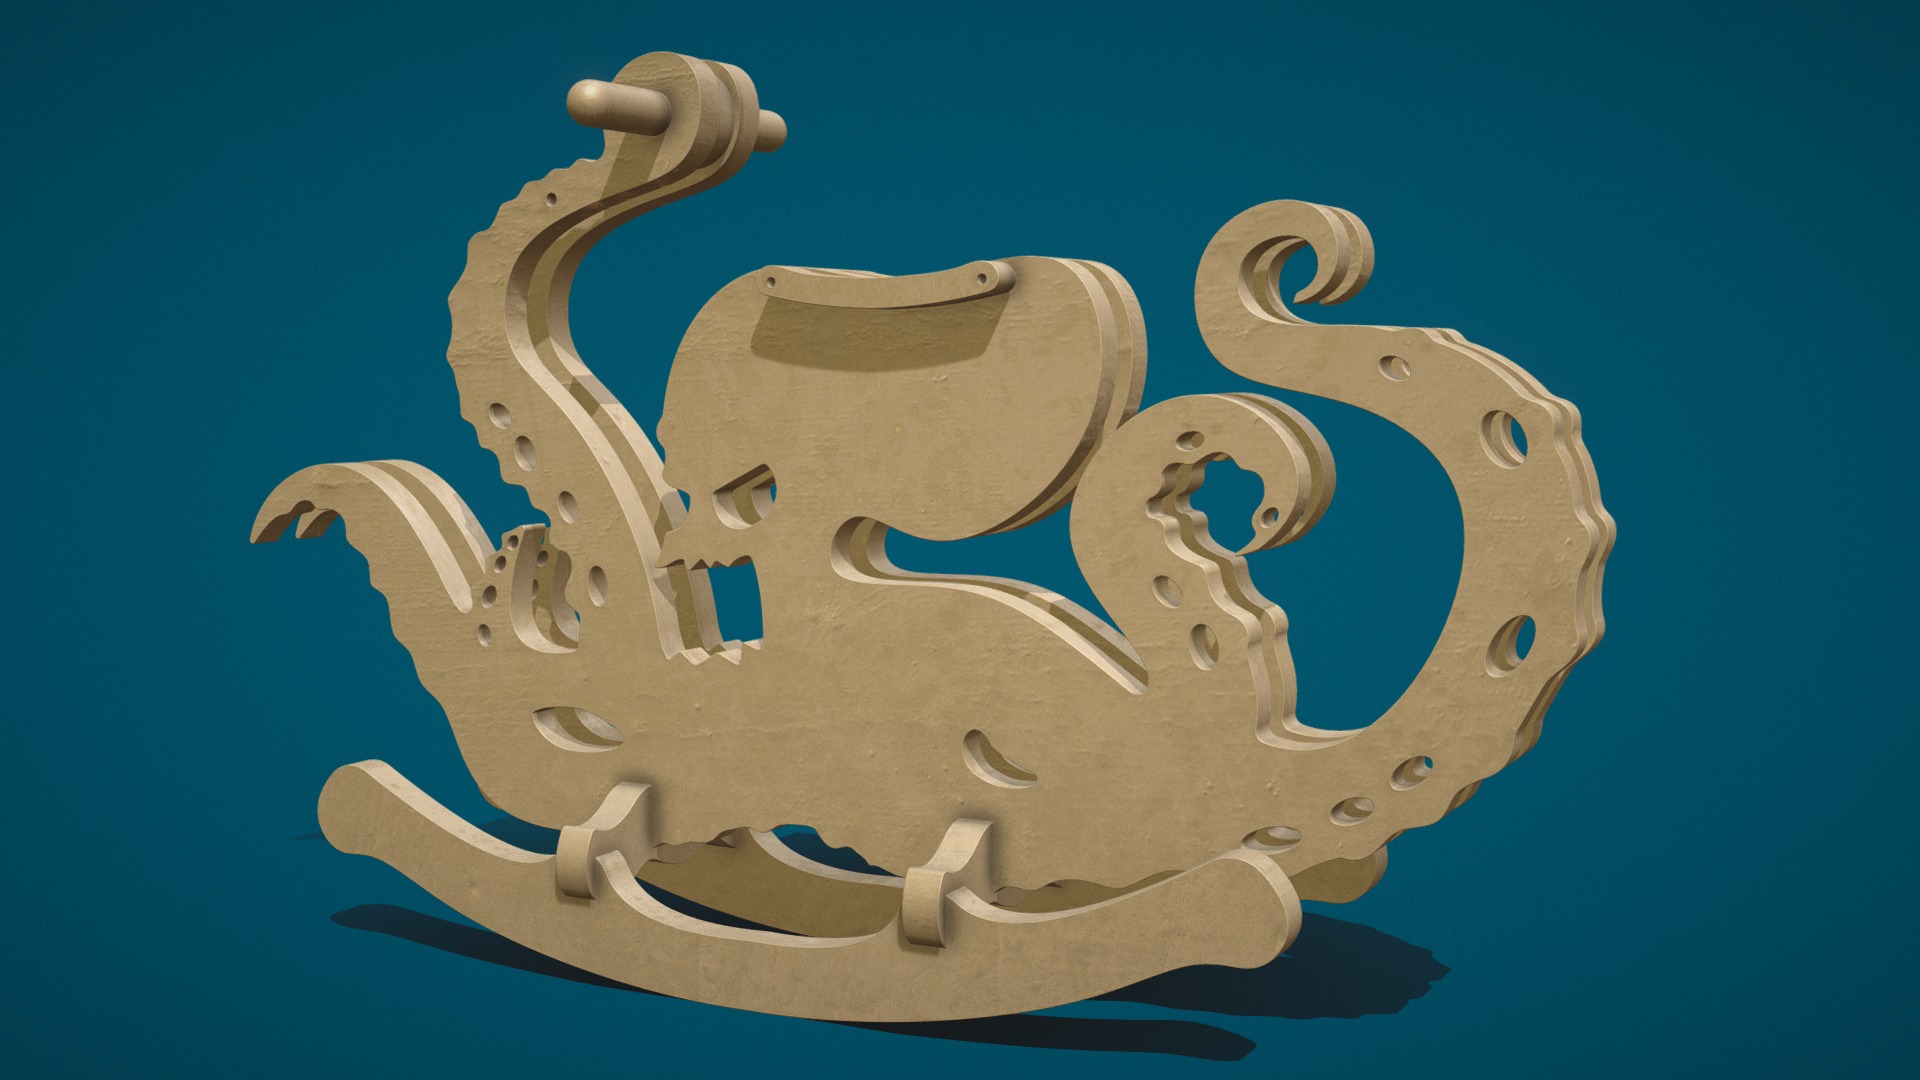 3D model Dondolo – Rocking chair (Octopus) – C. Bolimond - This is a 3D model of the Dondolo - Rocking chair (Octopus) - C. Bolimond. The 3D model is about a close-up of a fish.